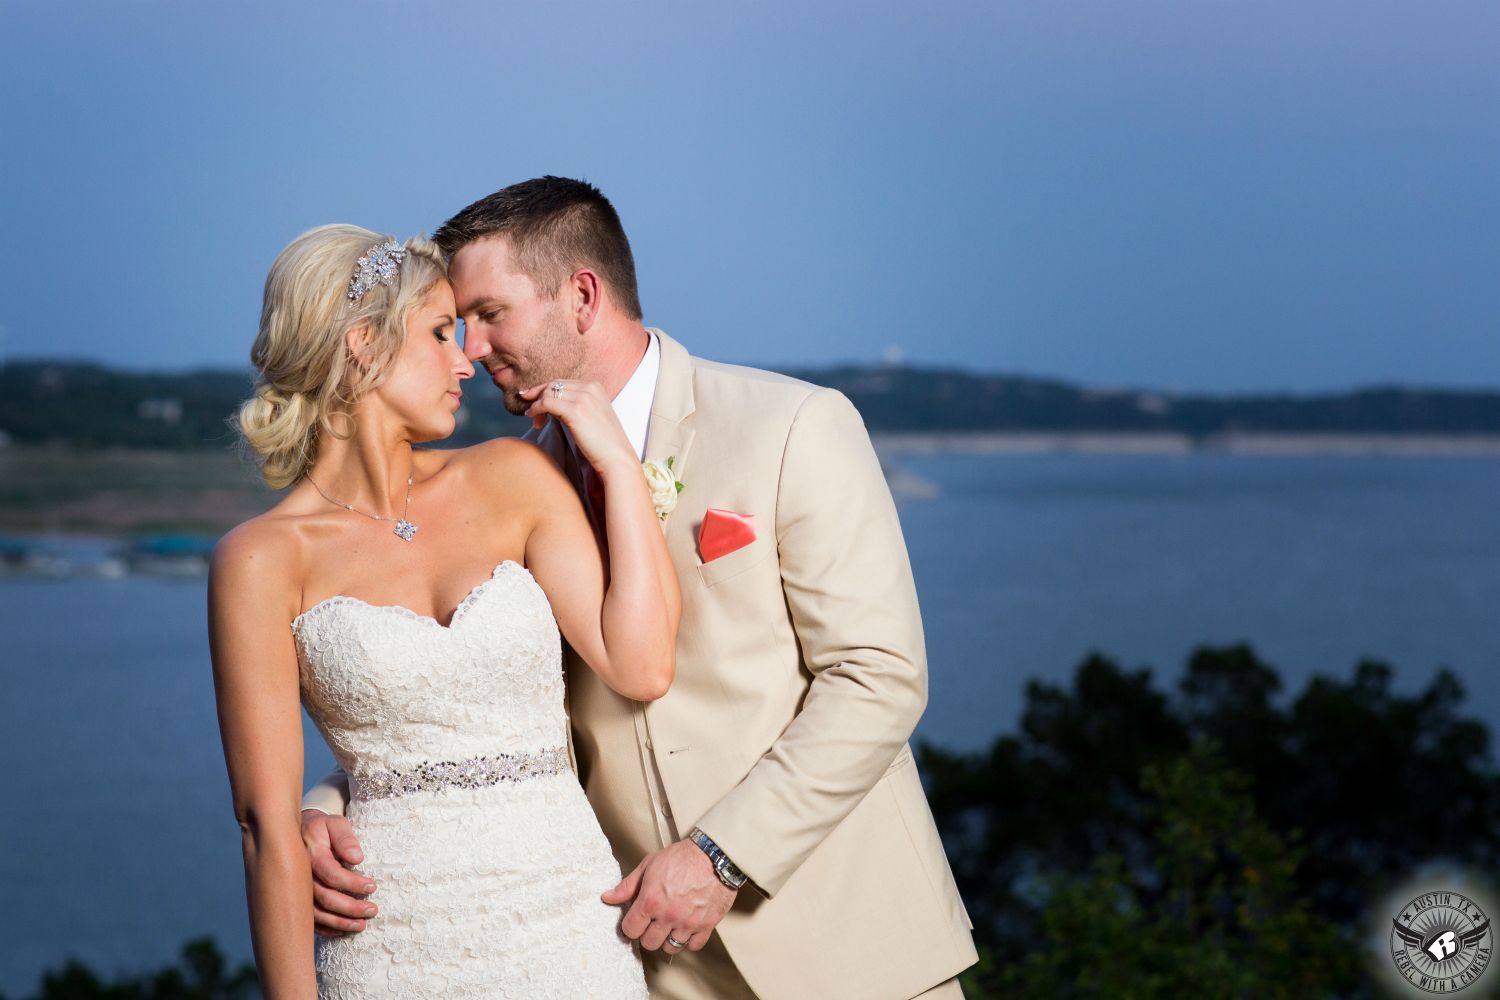 Bride in sparkly strapless wedding gown with diamond sash nuzzles groom in beige suit with amazing view of Lake Travis at Nature's Point wedding venue in Austin picture takes by Austin wedding photographer.